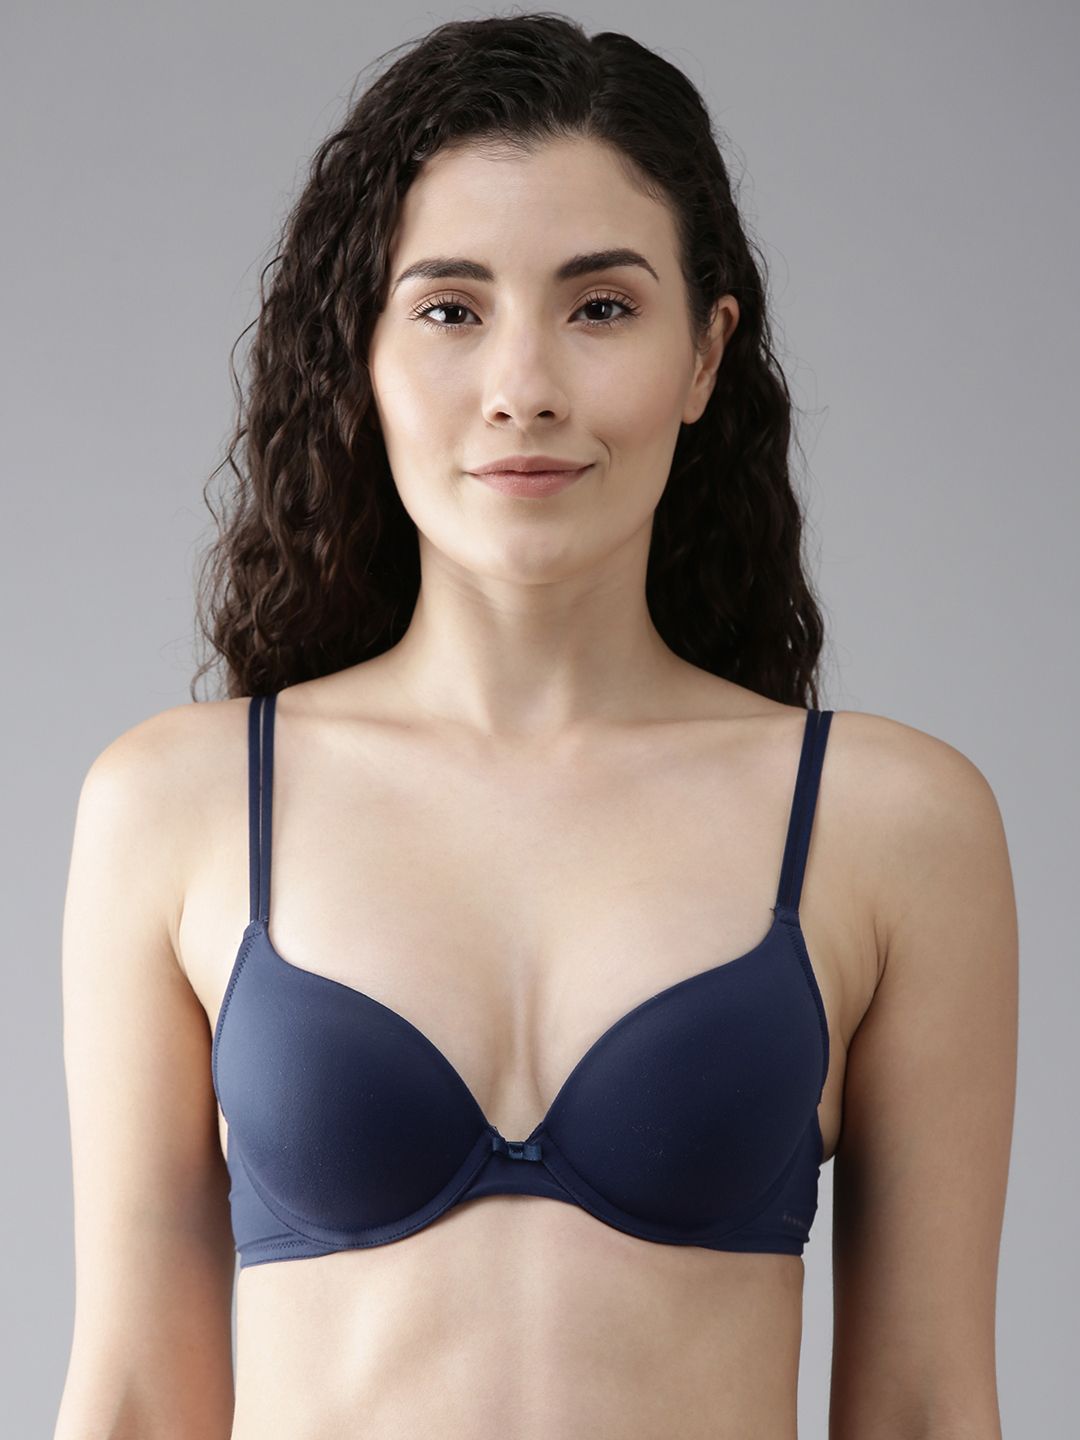 Van Heusen Blue Solid Underwired Lightly Padded Push Up Bra IILBRBLXSWW522005 Price in India